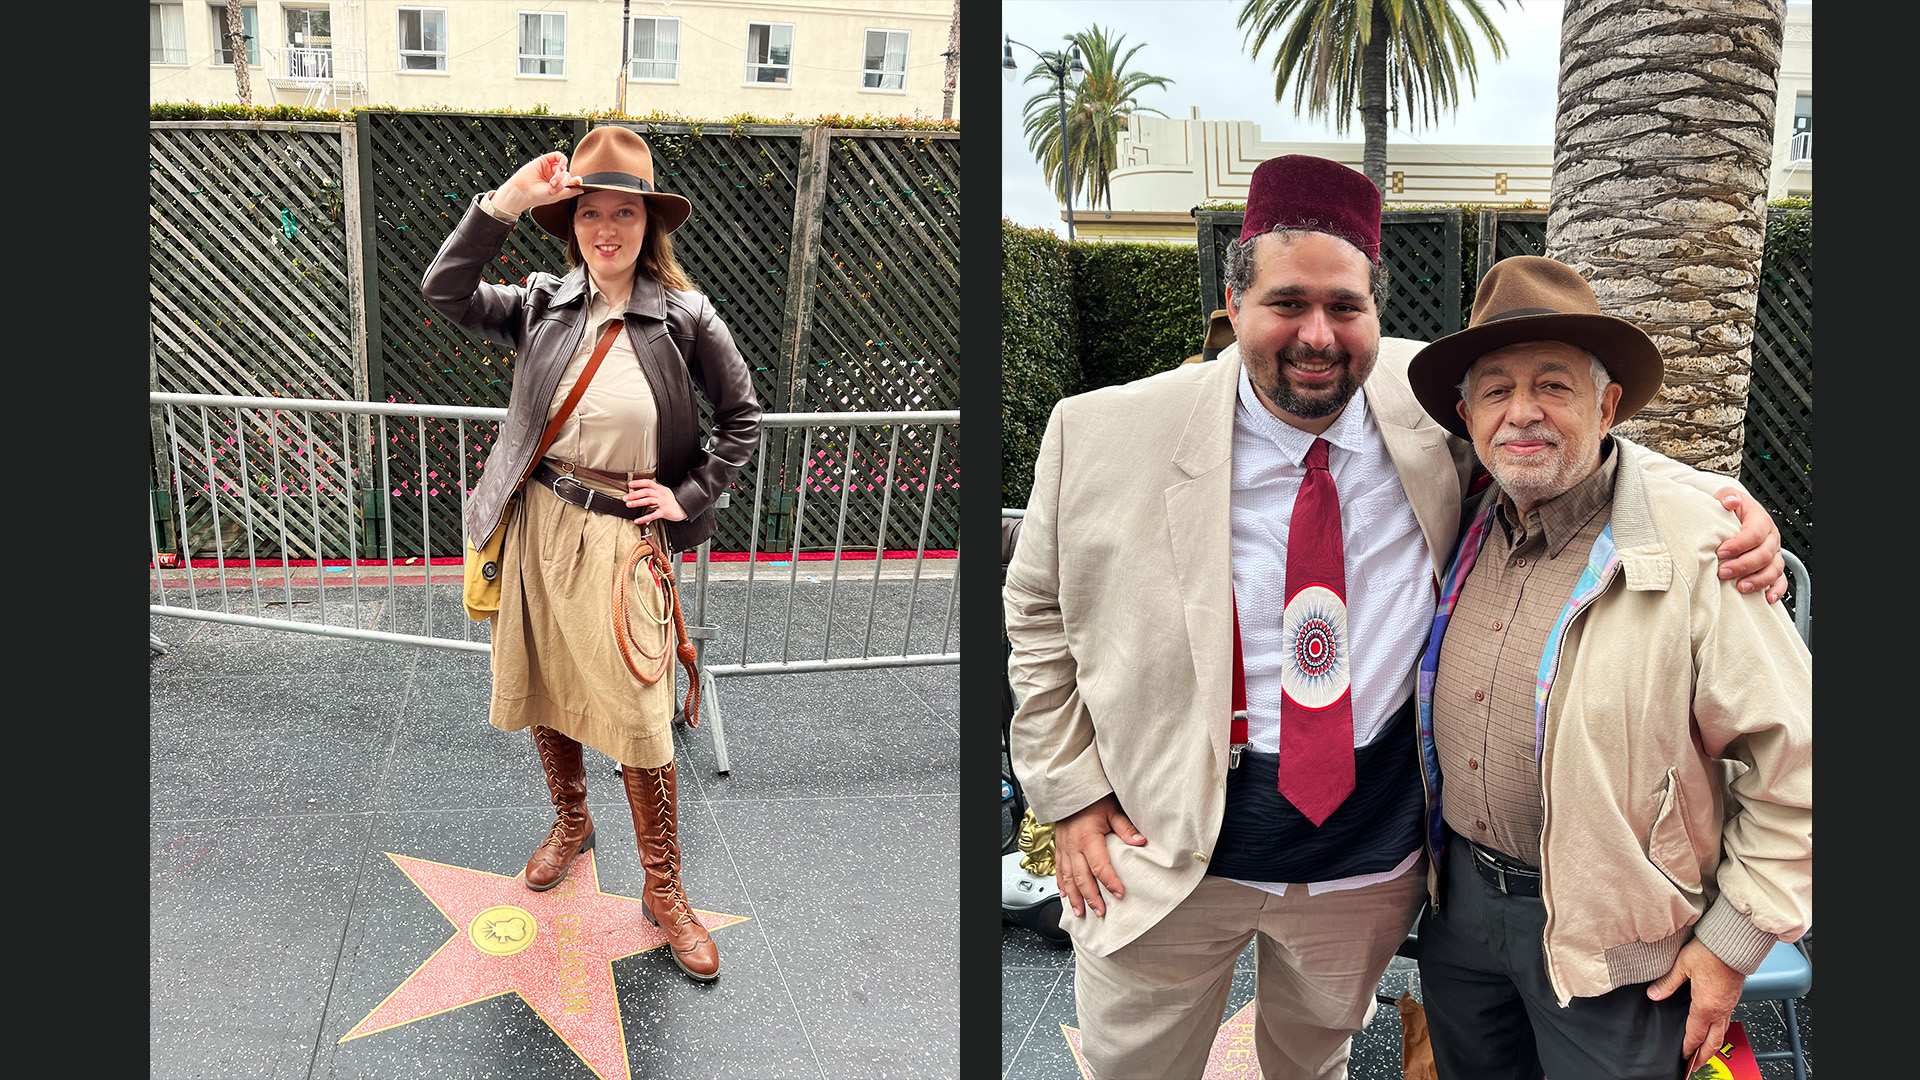 Fans in costume at the Indiana Jones premiere.